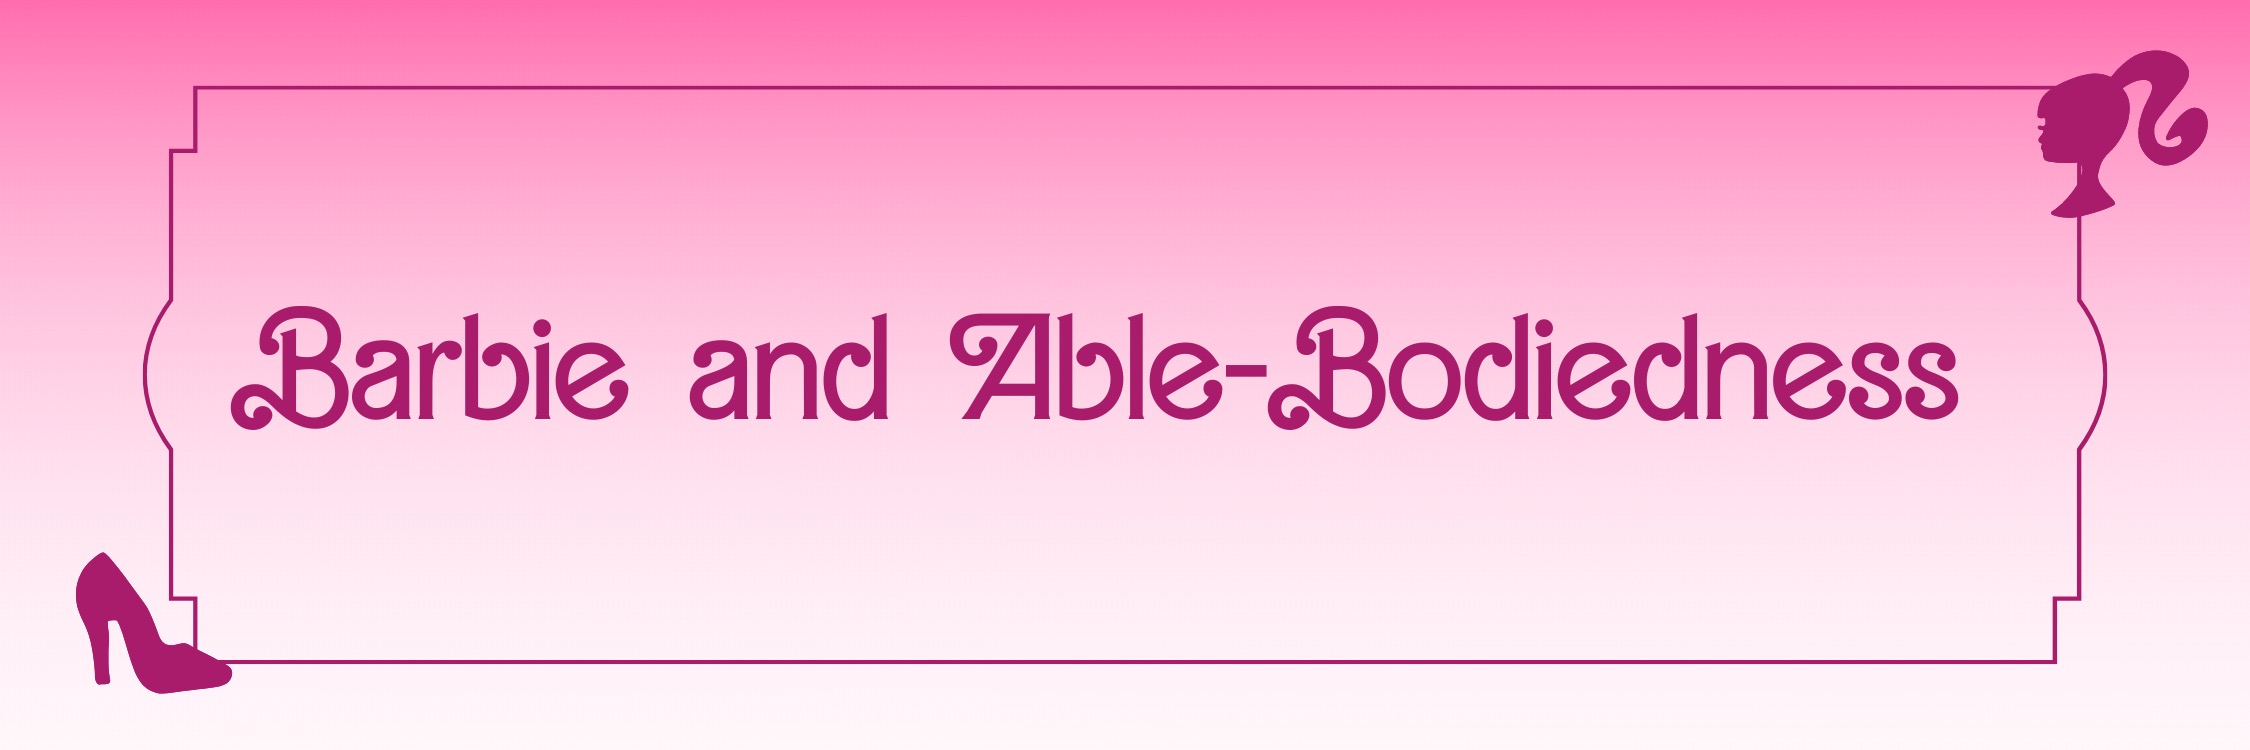 Barbie and Able-Bodiedness over pink gradient background